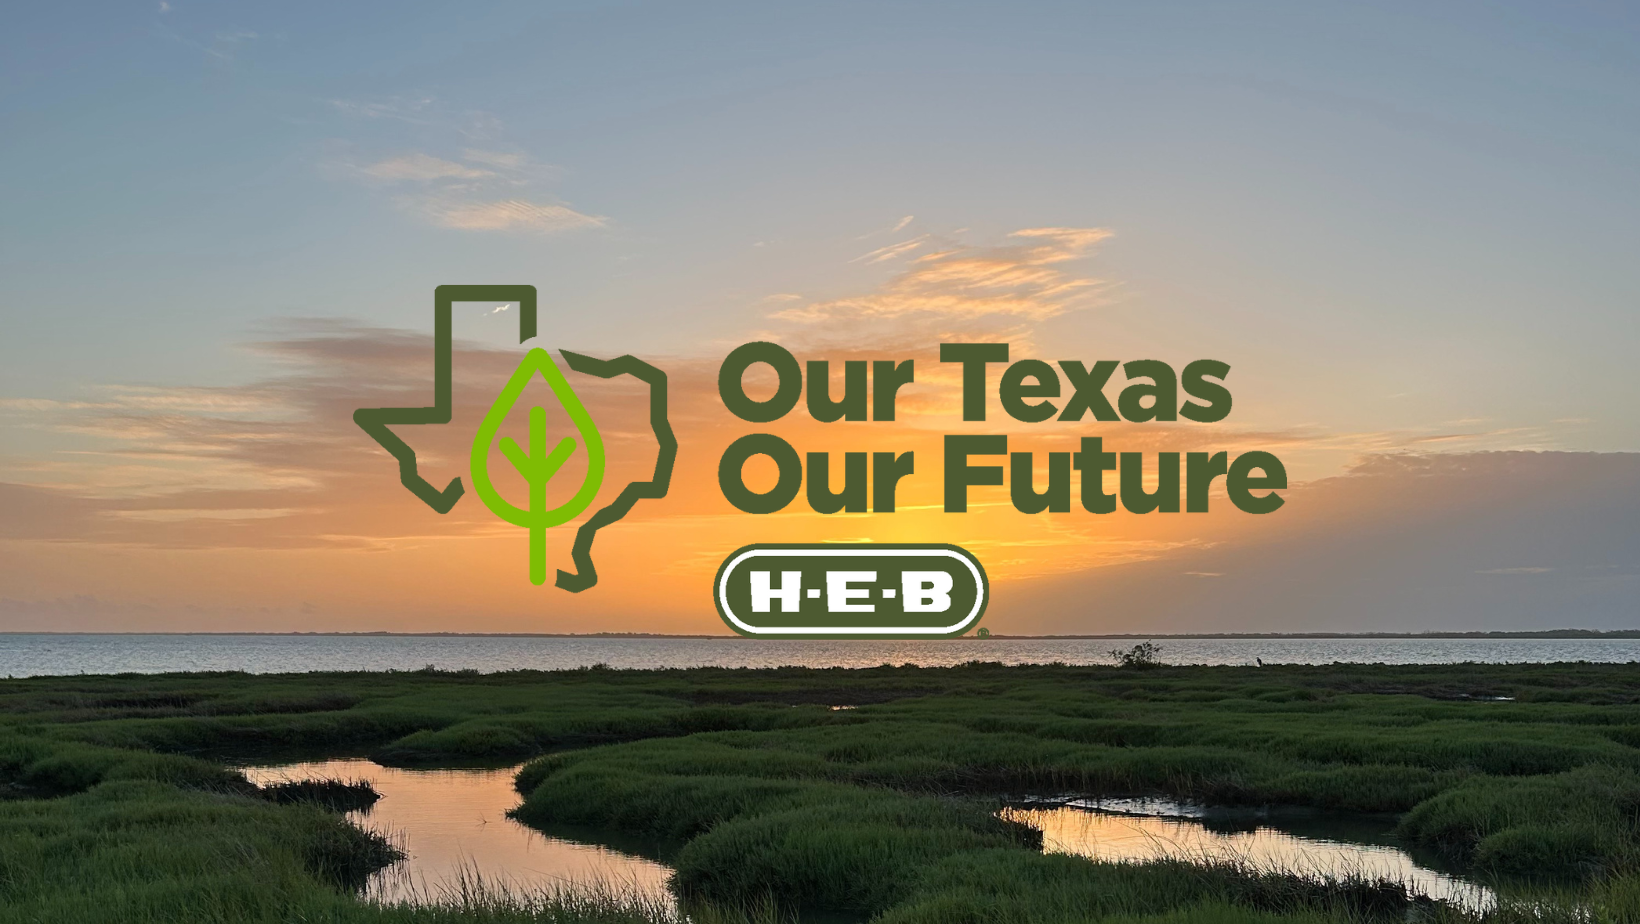 H-E-B: Our Partner in Conservation